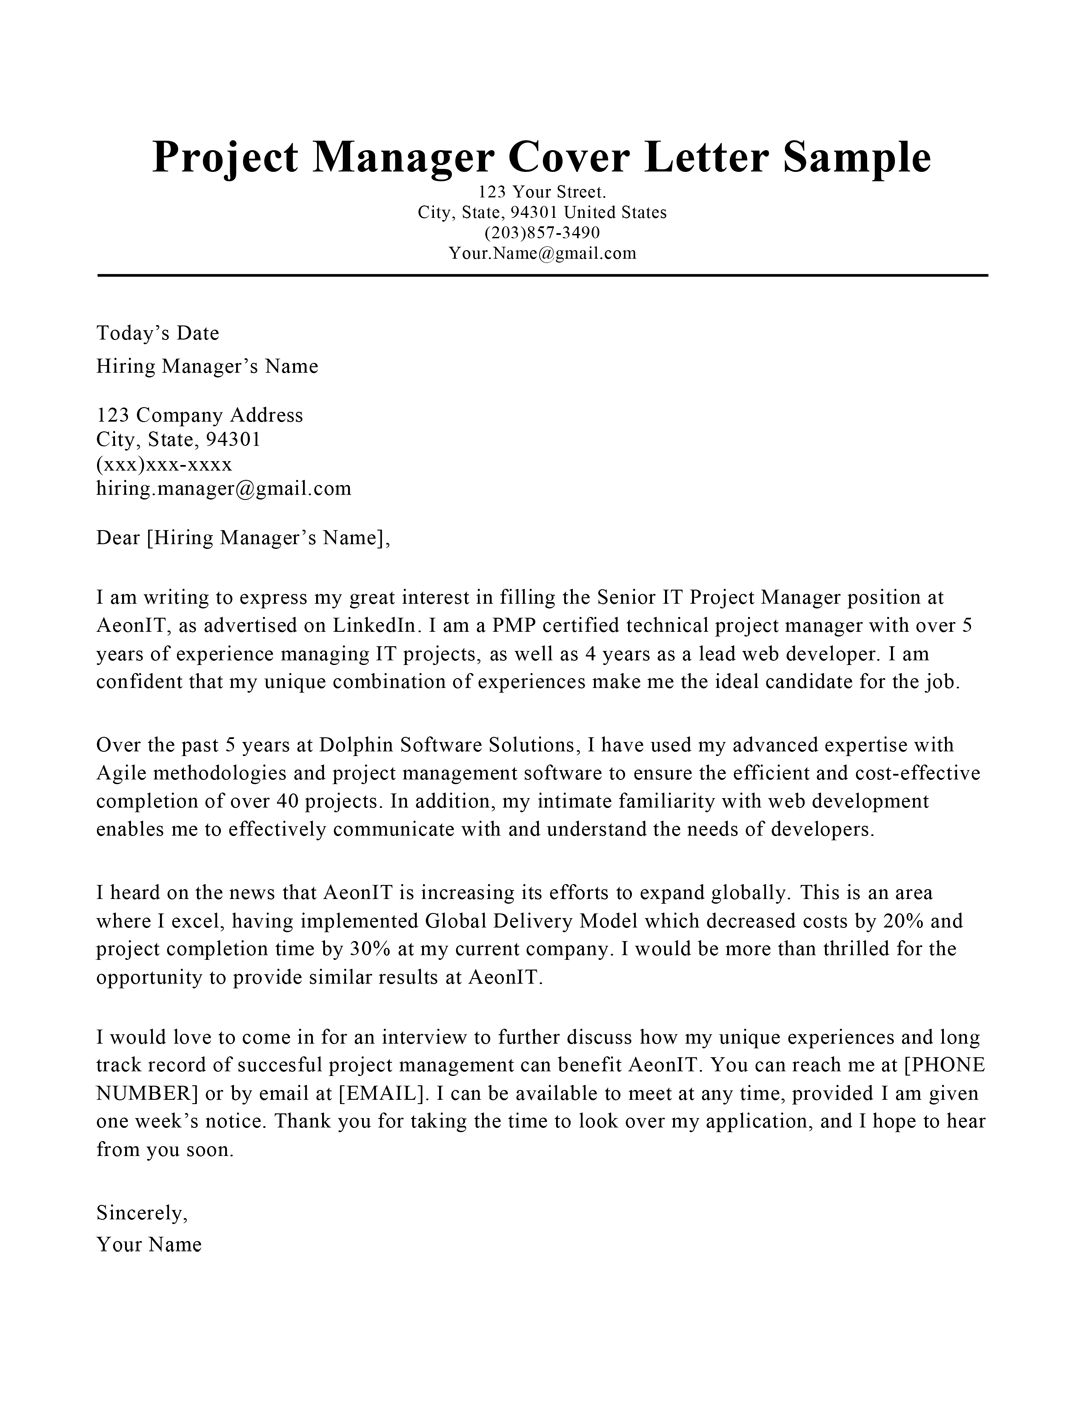 Addressing Hiring Manager In Cover Letter from resumecompanion.com